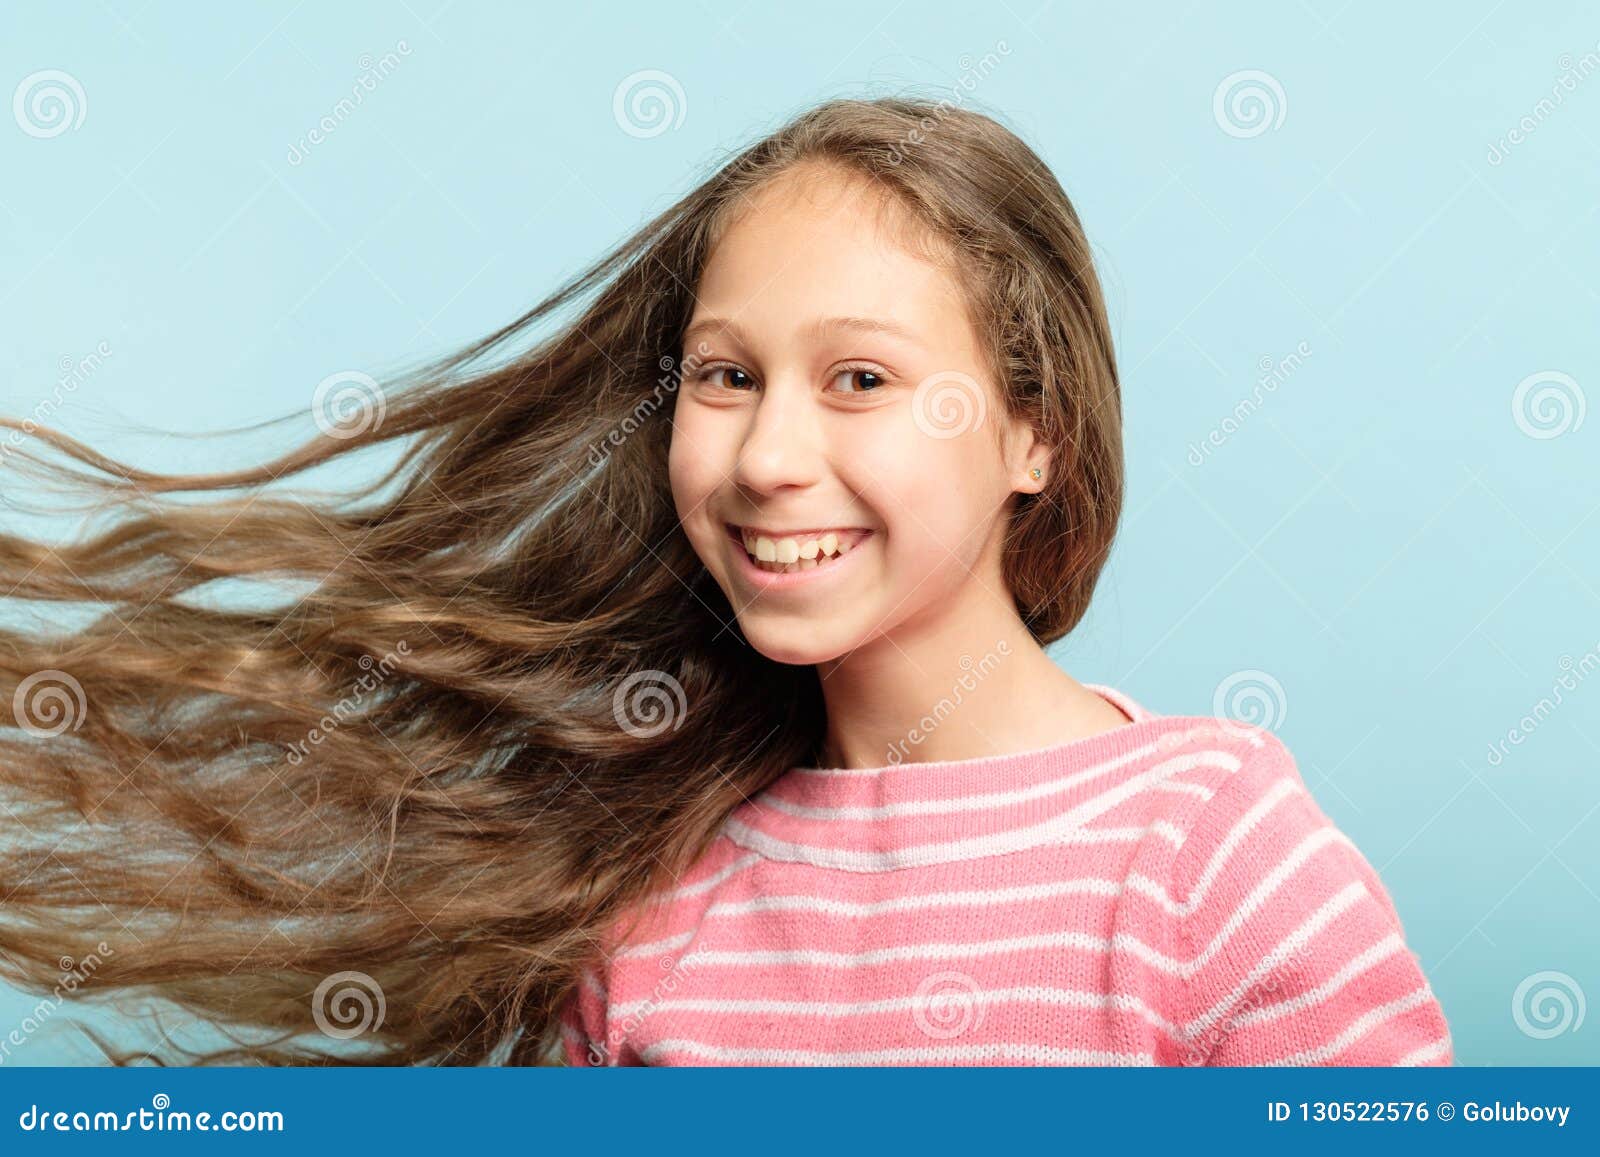 Adolescent Girl Wavy Hair Flying Haircare Kids Stock Photo - Image of ...